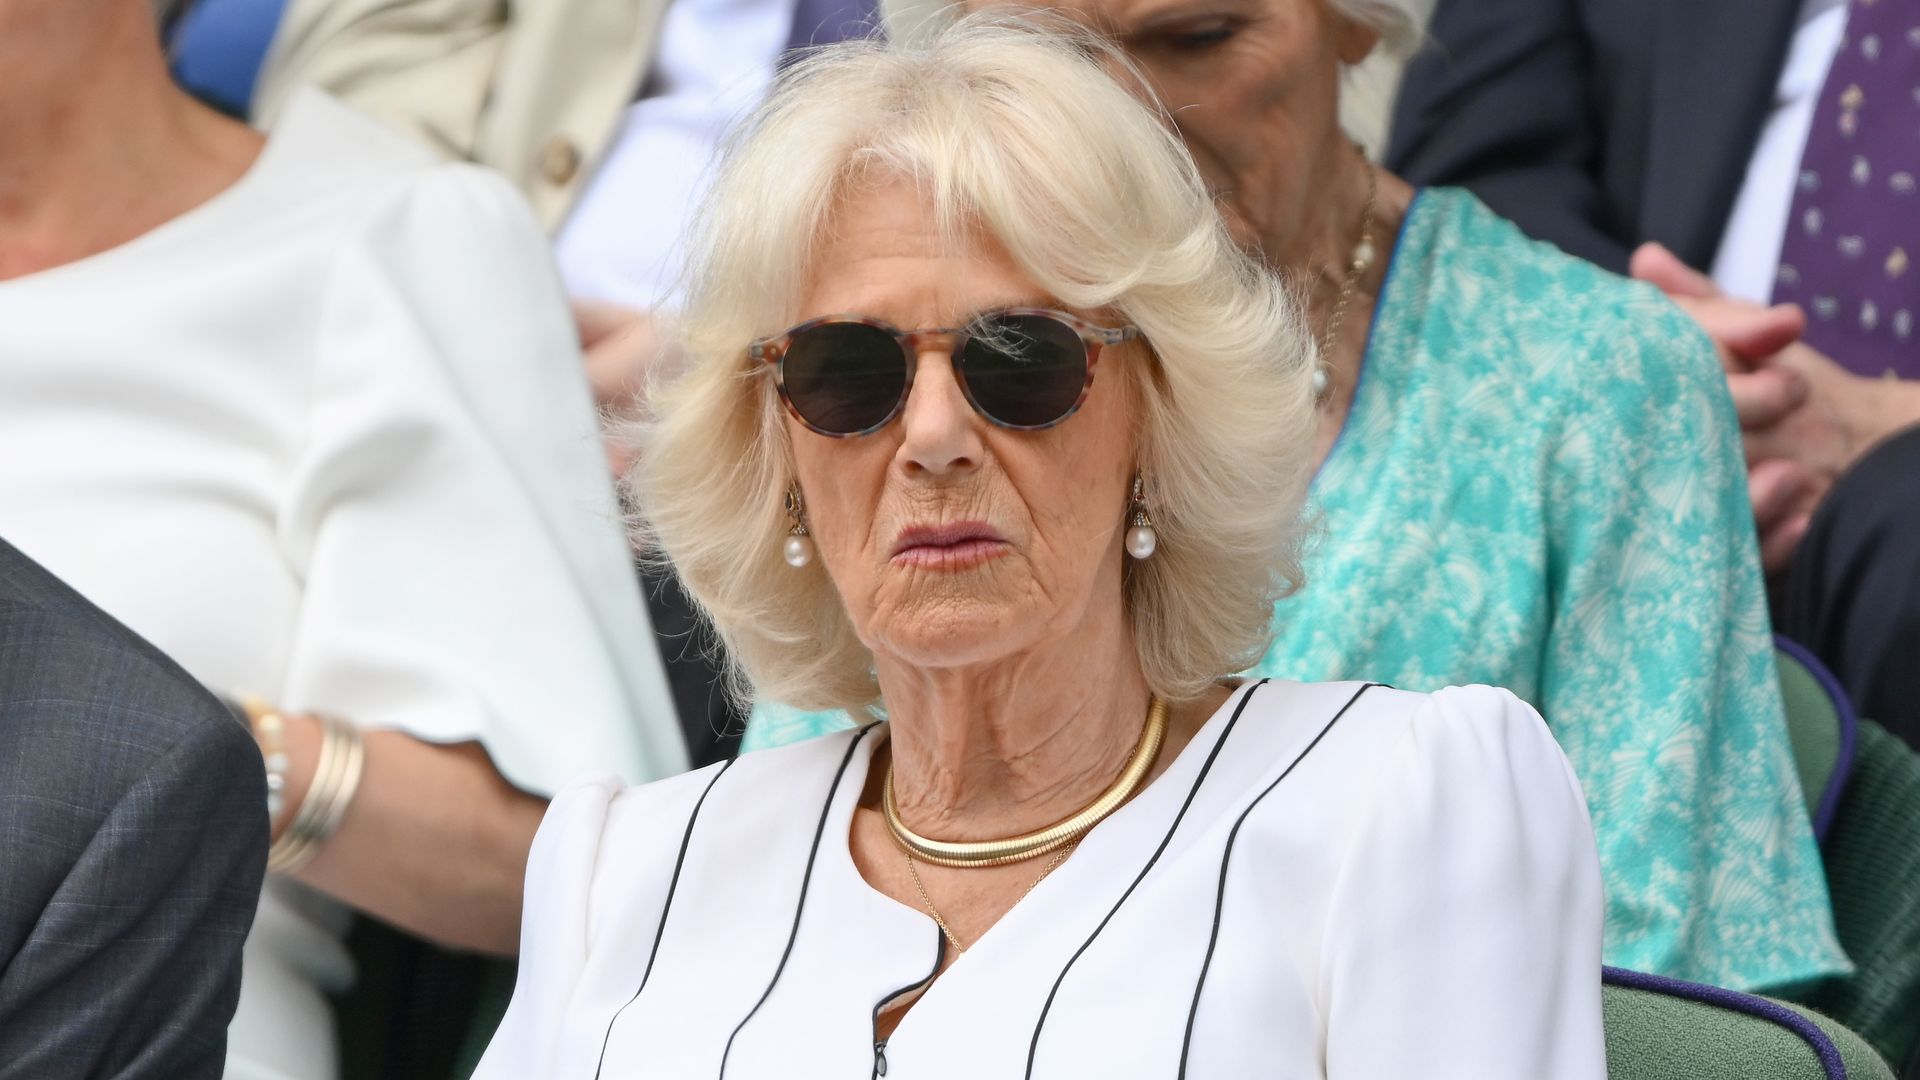 Queen Camilla in a white dress and sunglasses at Wimbledon